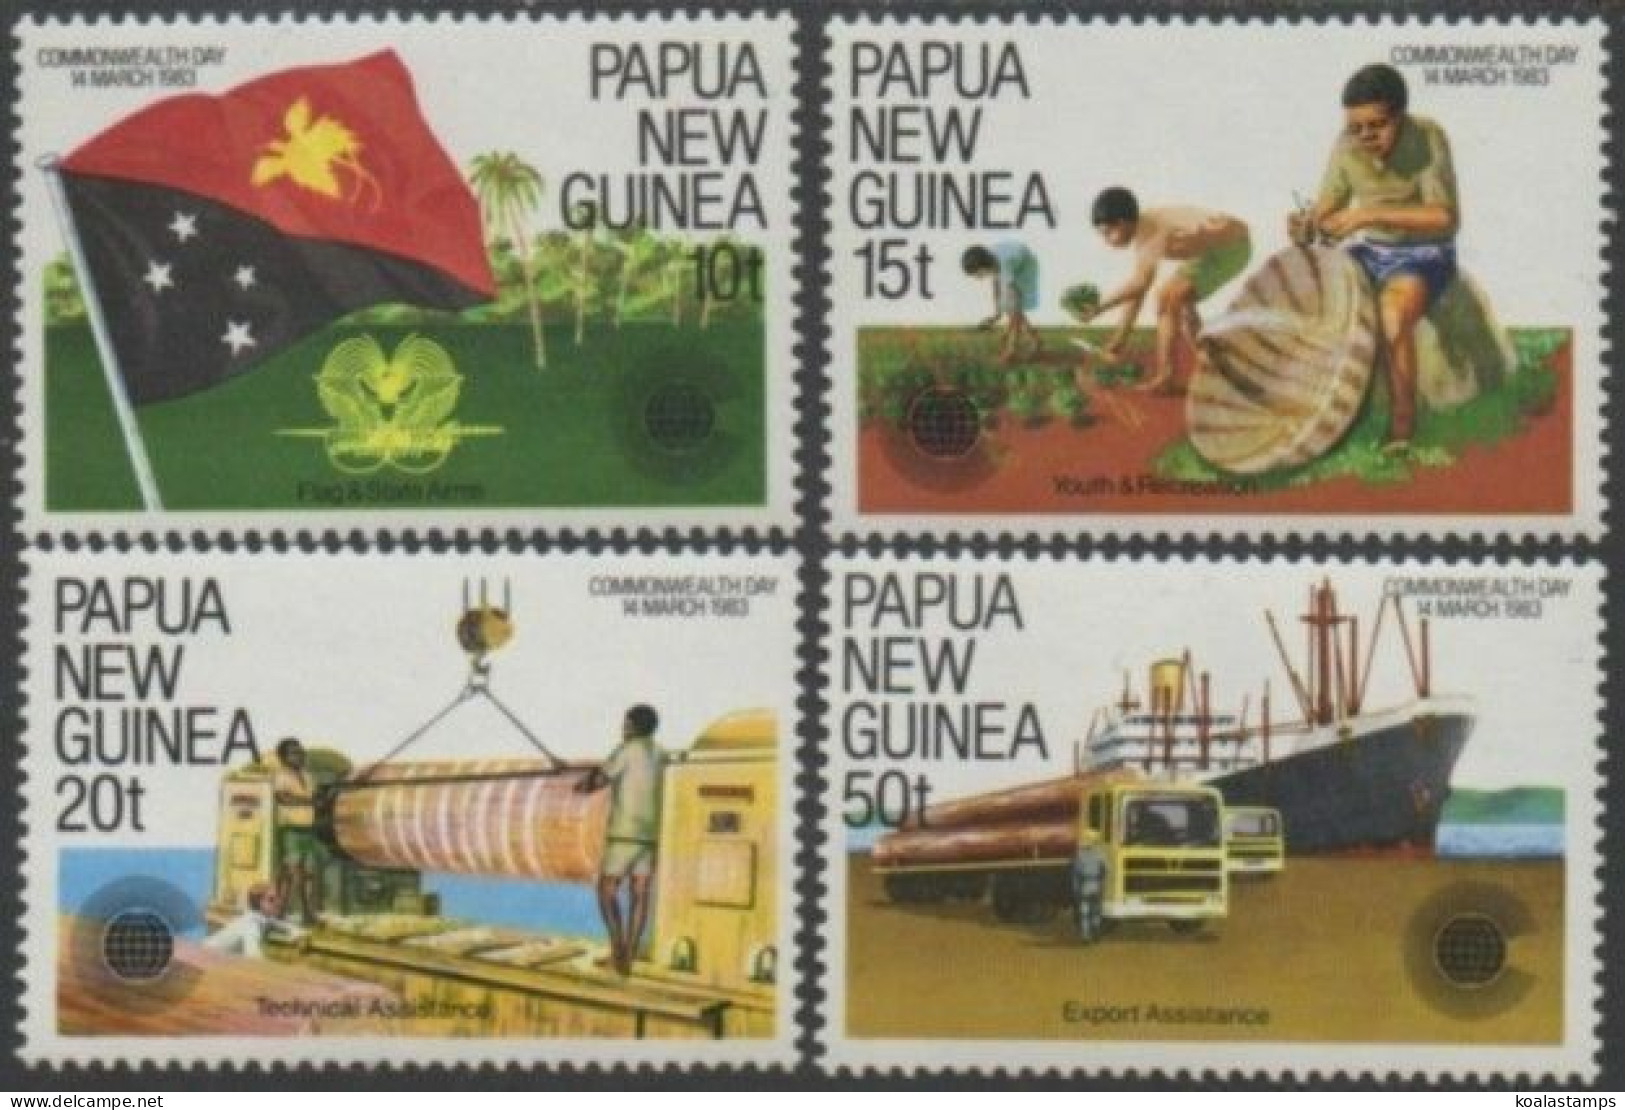 Papua New Guinea 1983 SG464-467 Commonwealth Day Set MNH - Papouasie-Nouvelle-Guinée